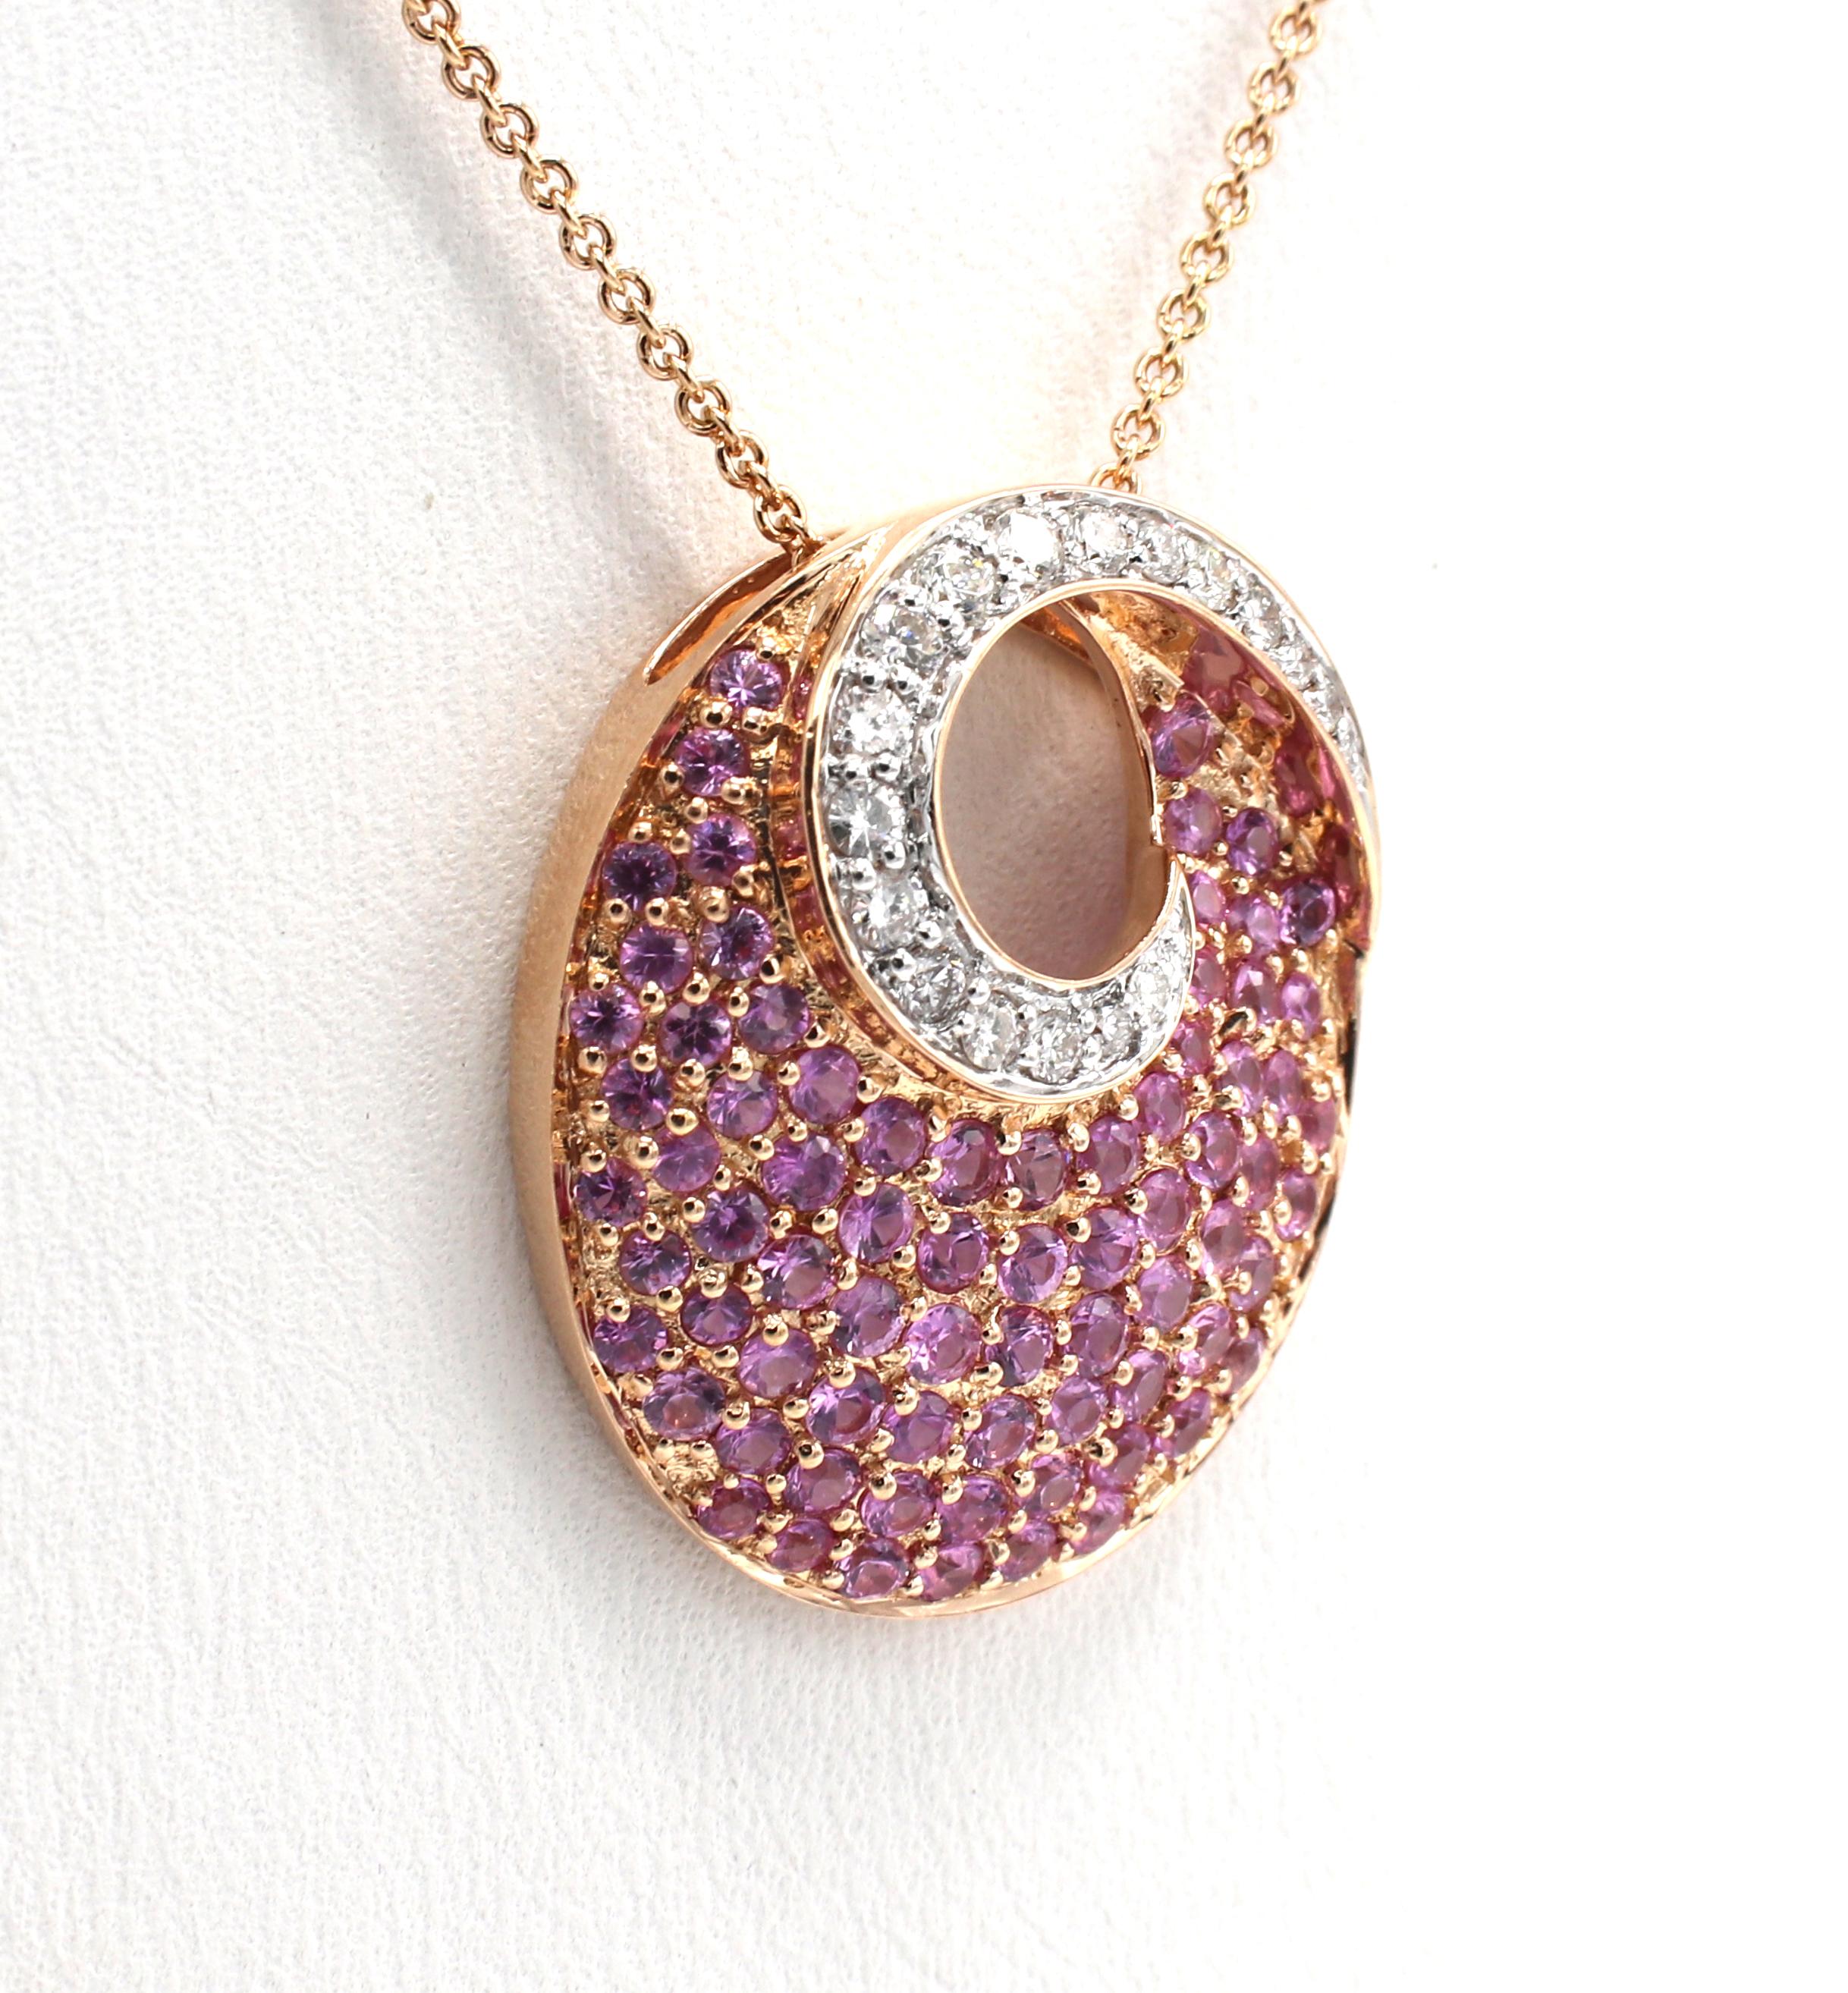 Le Vian Rose Gold Pink Sapphire & Diamond Dangle Drop Necklace
Metal: 14k rose gold
Weight: 7.20 grams
Diamonds: .25 CTW G VS (marked D025)
Sapphires: 1.50 CTW (marked S150)
Chain length: 18 inches
Pendant: 23 x 19.5mm
